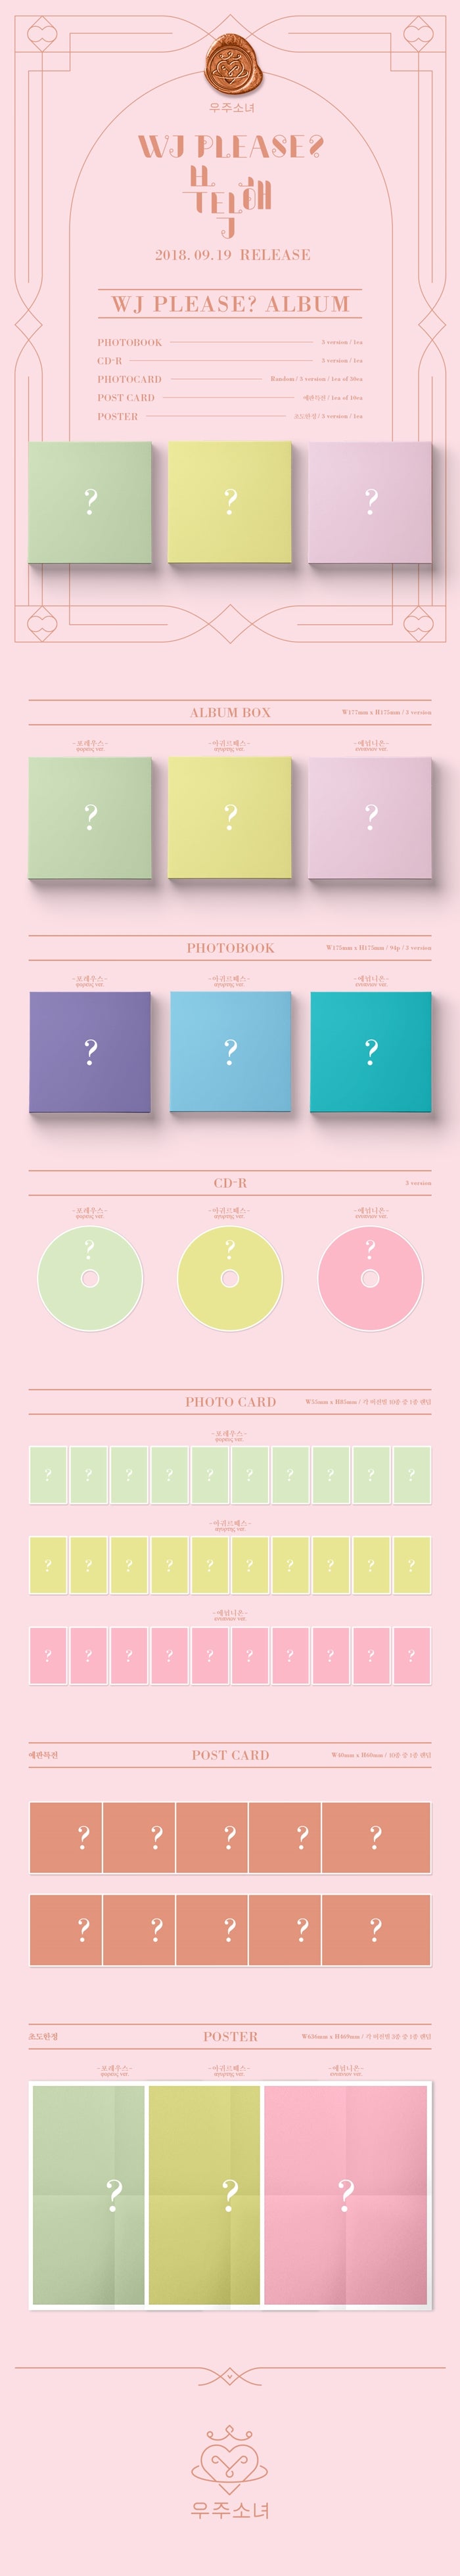 1 CD
1 Photo Book (94 pages)
1 Photo Card